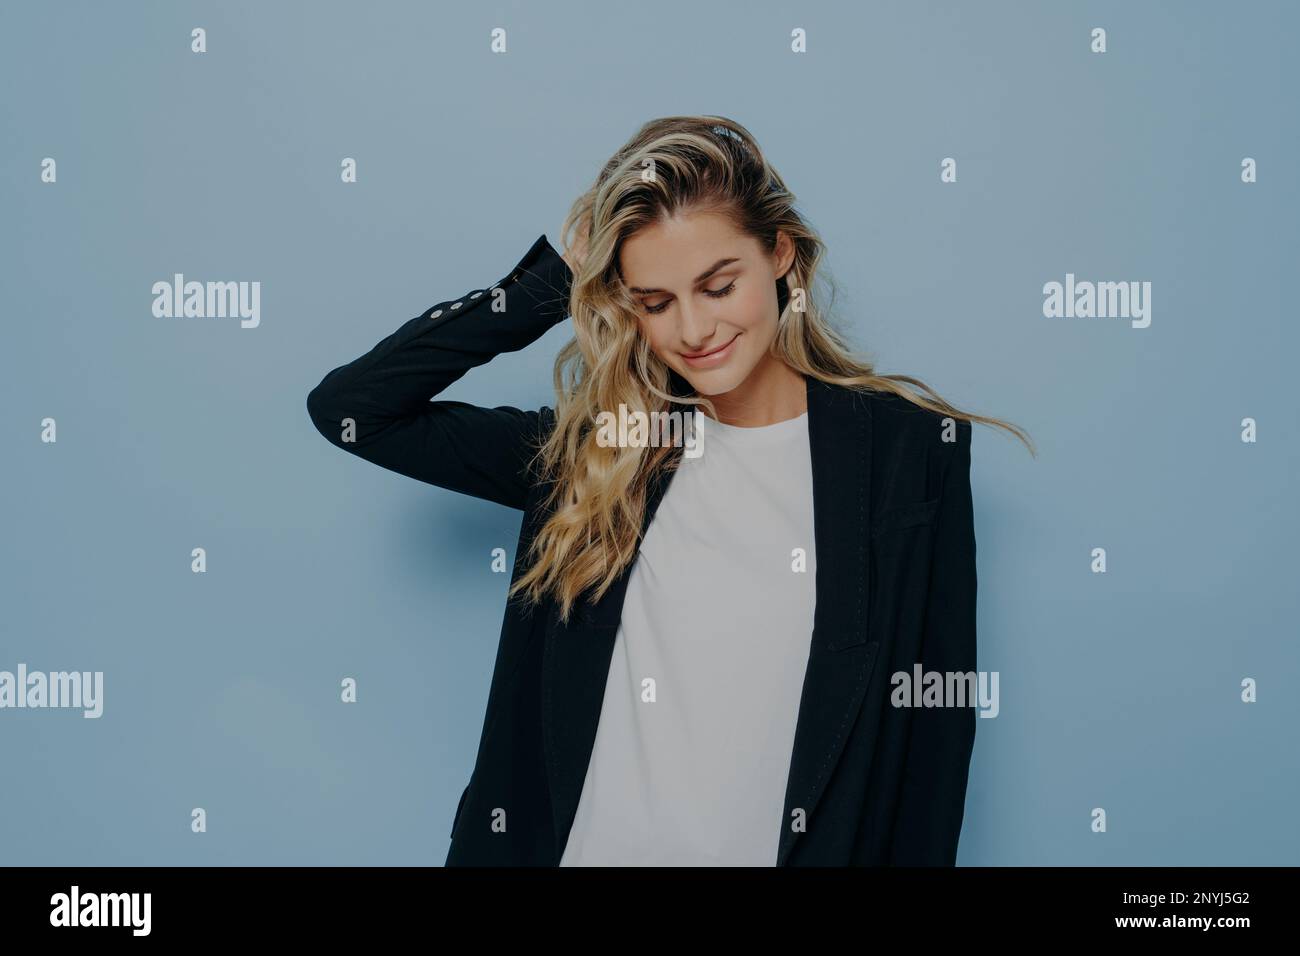 Beautiful smiling female with blonde dyed hair feeling happy, wearing black blazer over white tshirt while standing isolated against blue background, Stock Photo